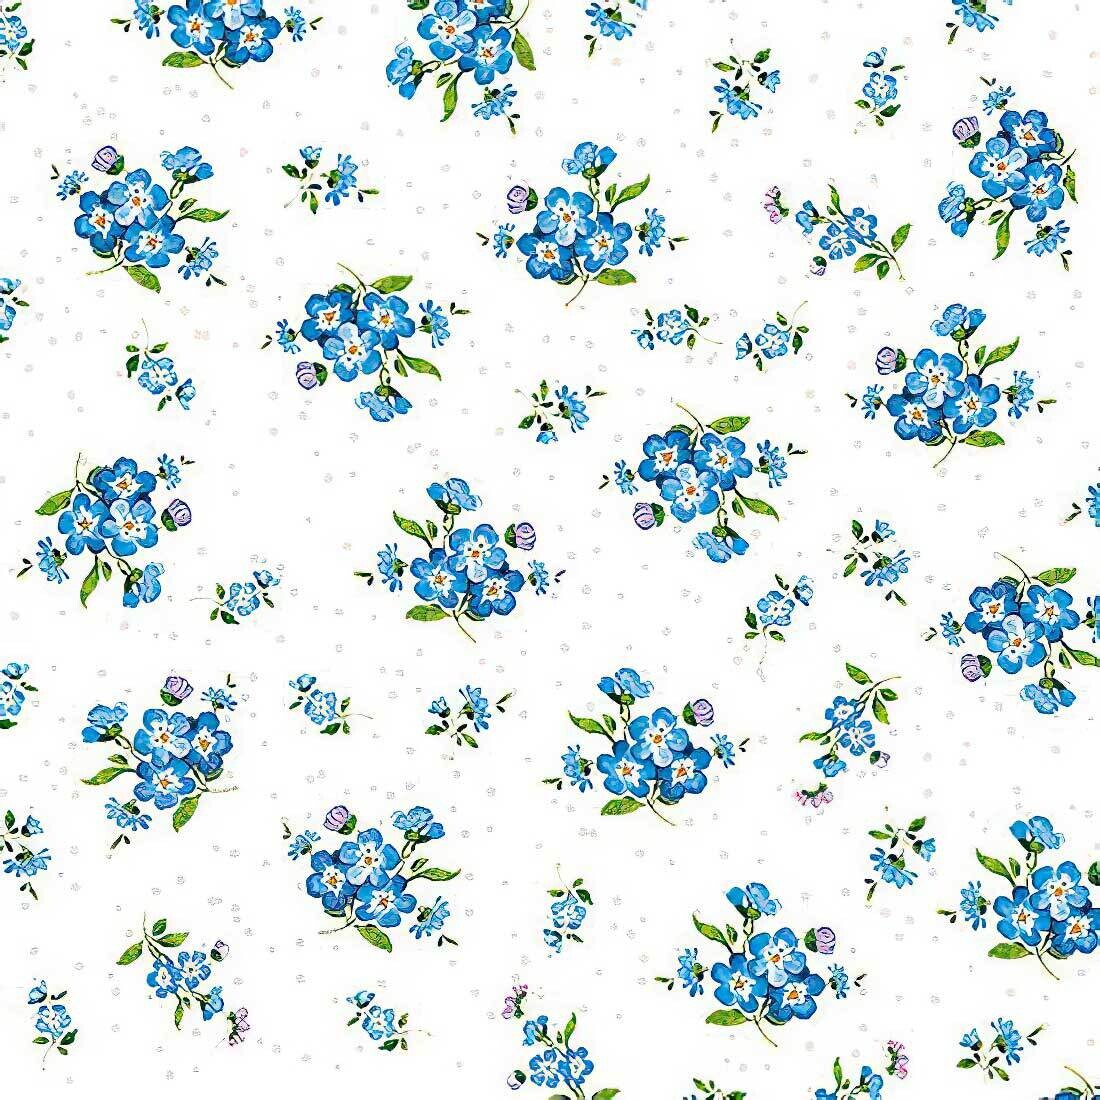 Decoupage Paper Napkins - Floral - Forget Me Not (1 Sheet) Out of Stock